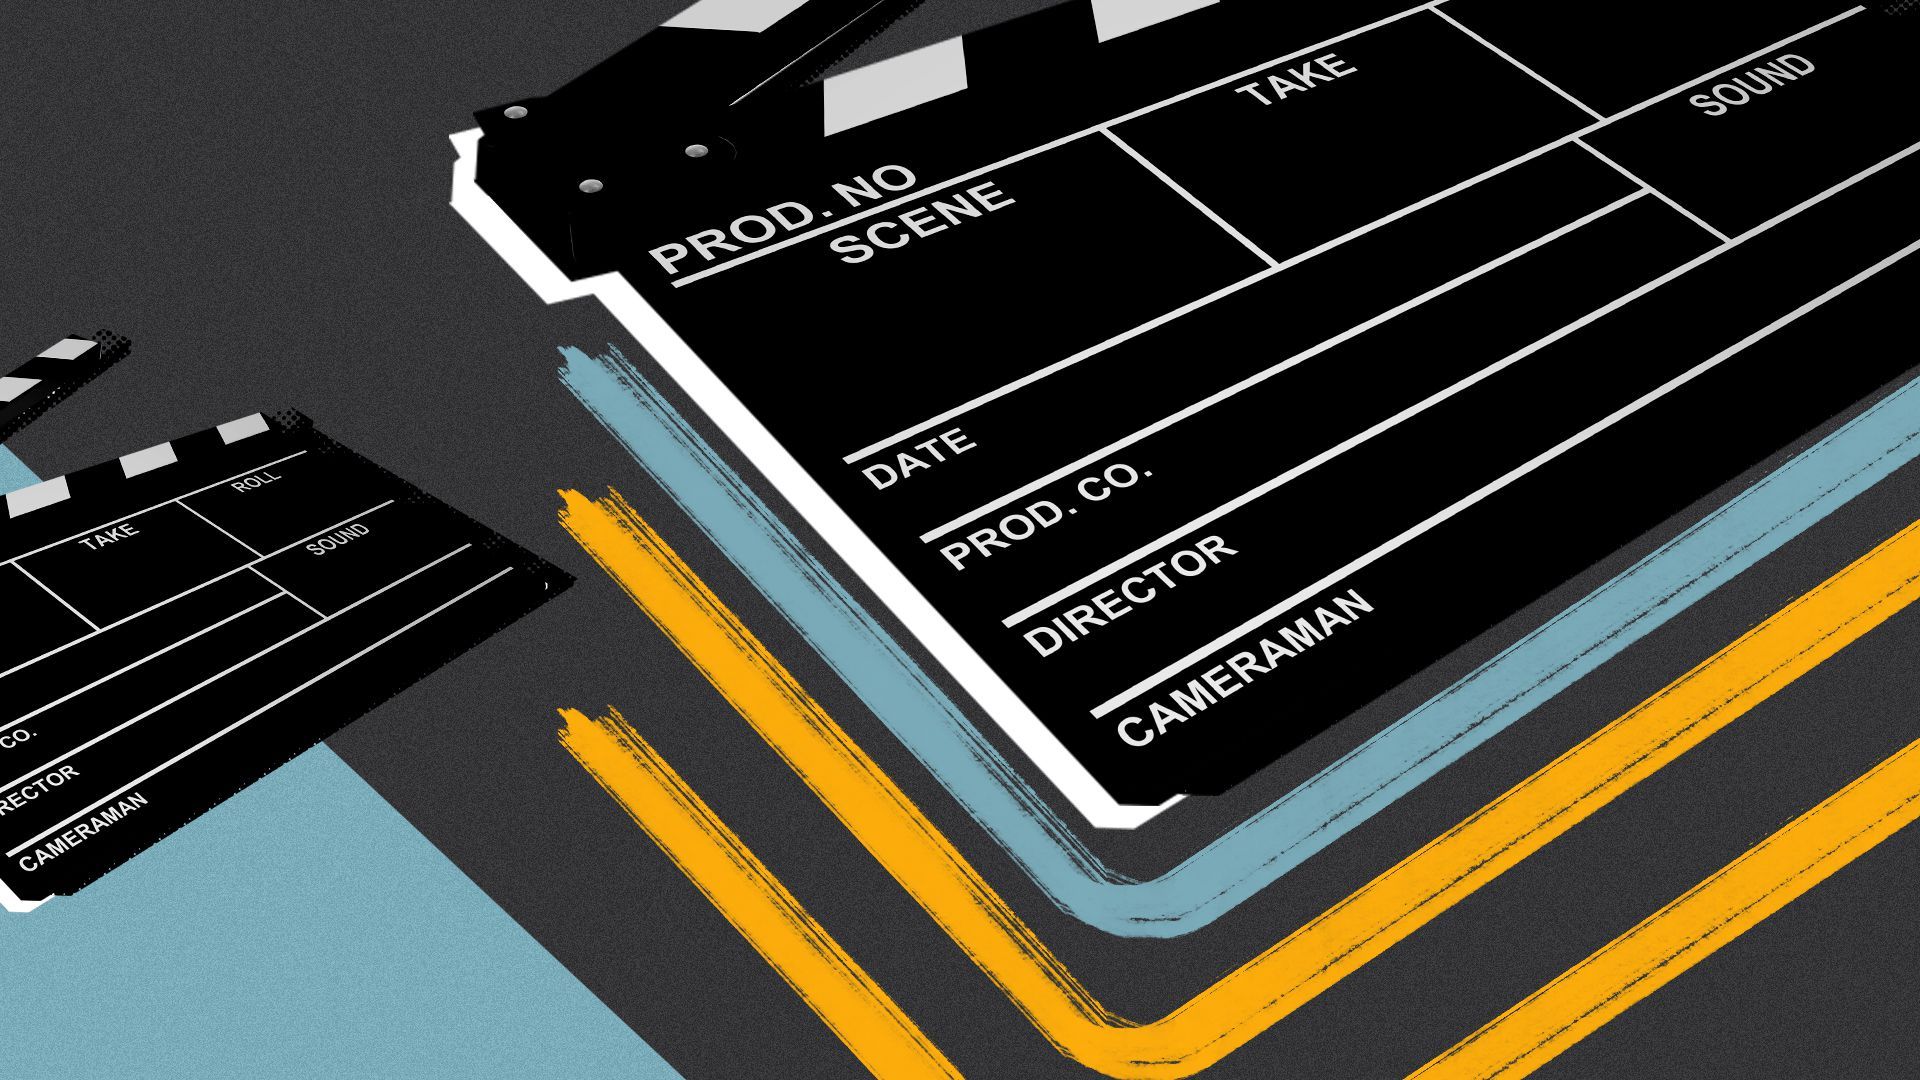 Illustration collage of two clapper boards separated by geometric shapes and lines